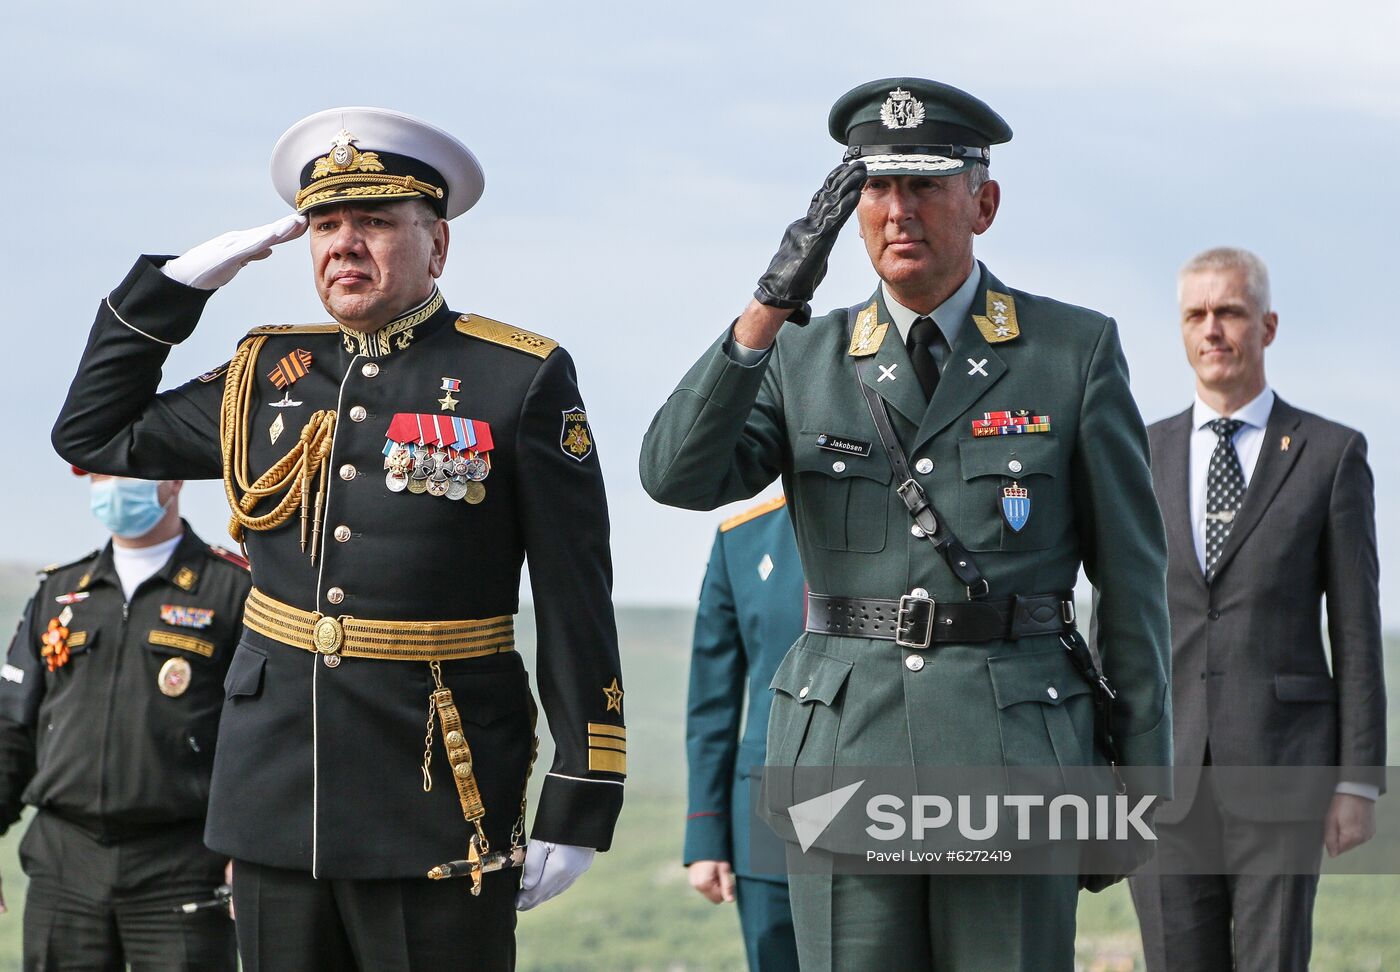 Military parades in Russian cities to commemorate 75th anniversary of Victory in World War II